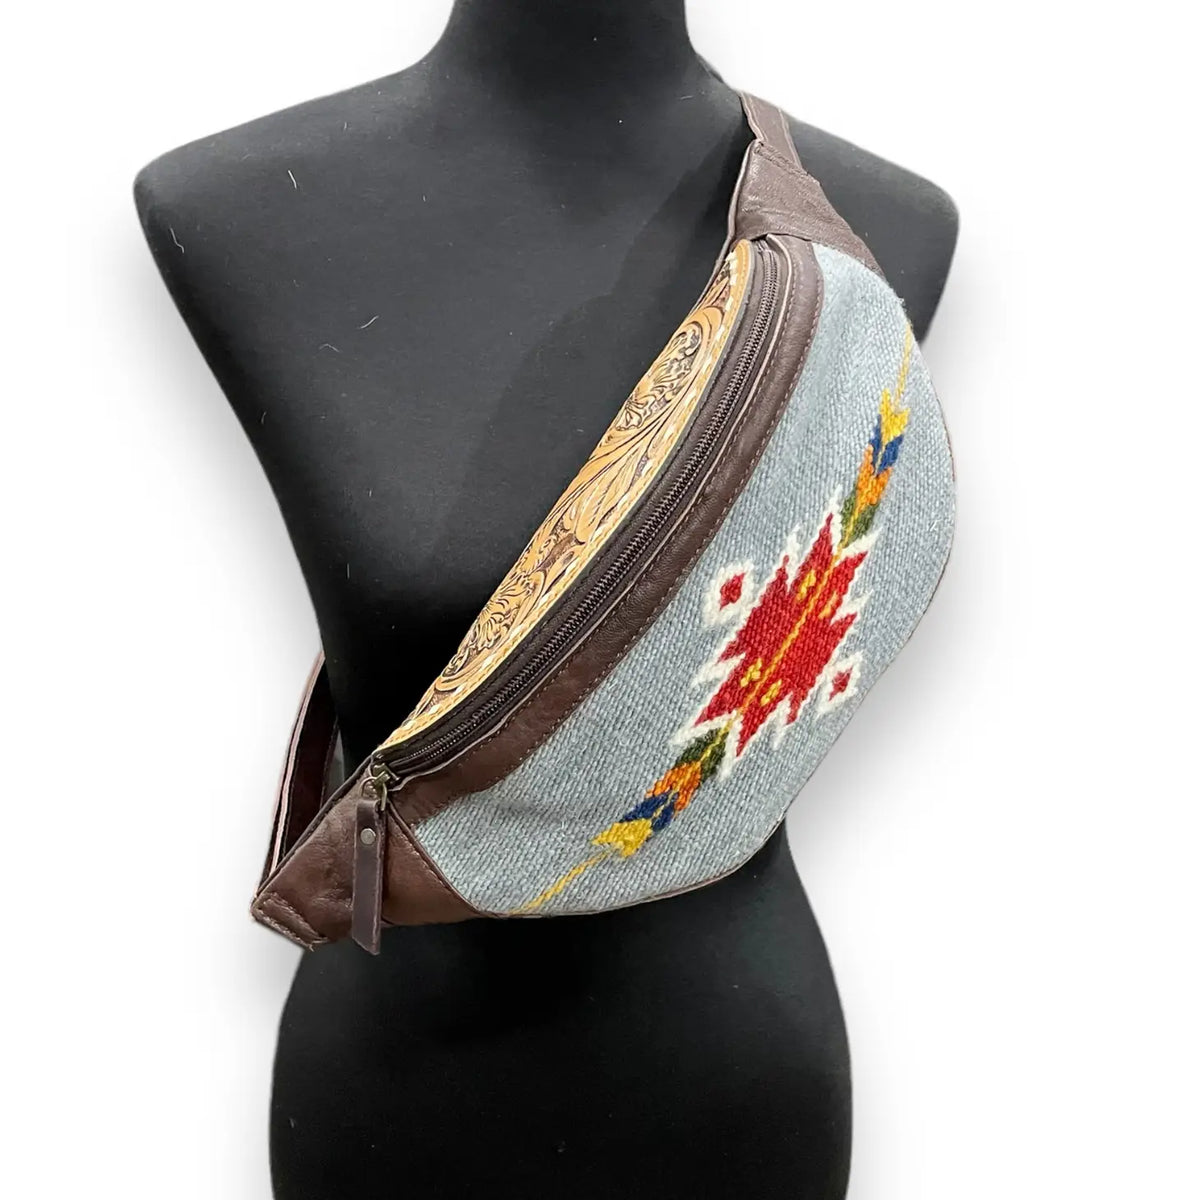 The Saddle Bag Sling Bag-Bags & Purses-Deadwood South Boutique & Company-Deadwood South Boutique, Women's Fashion Boutique in Henderson, TX